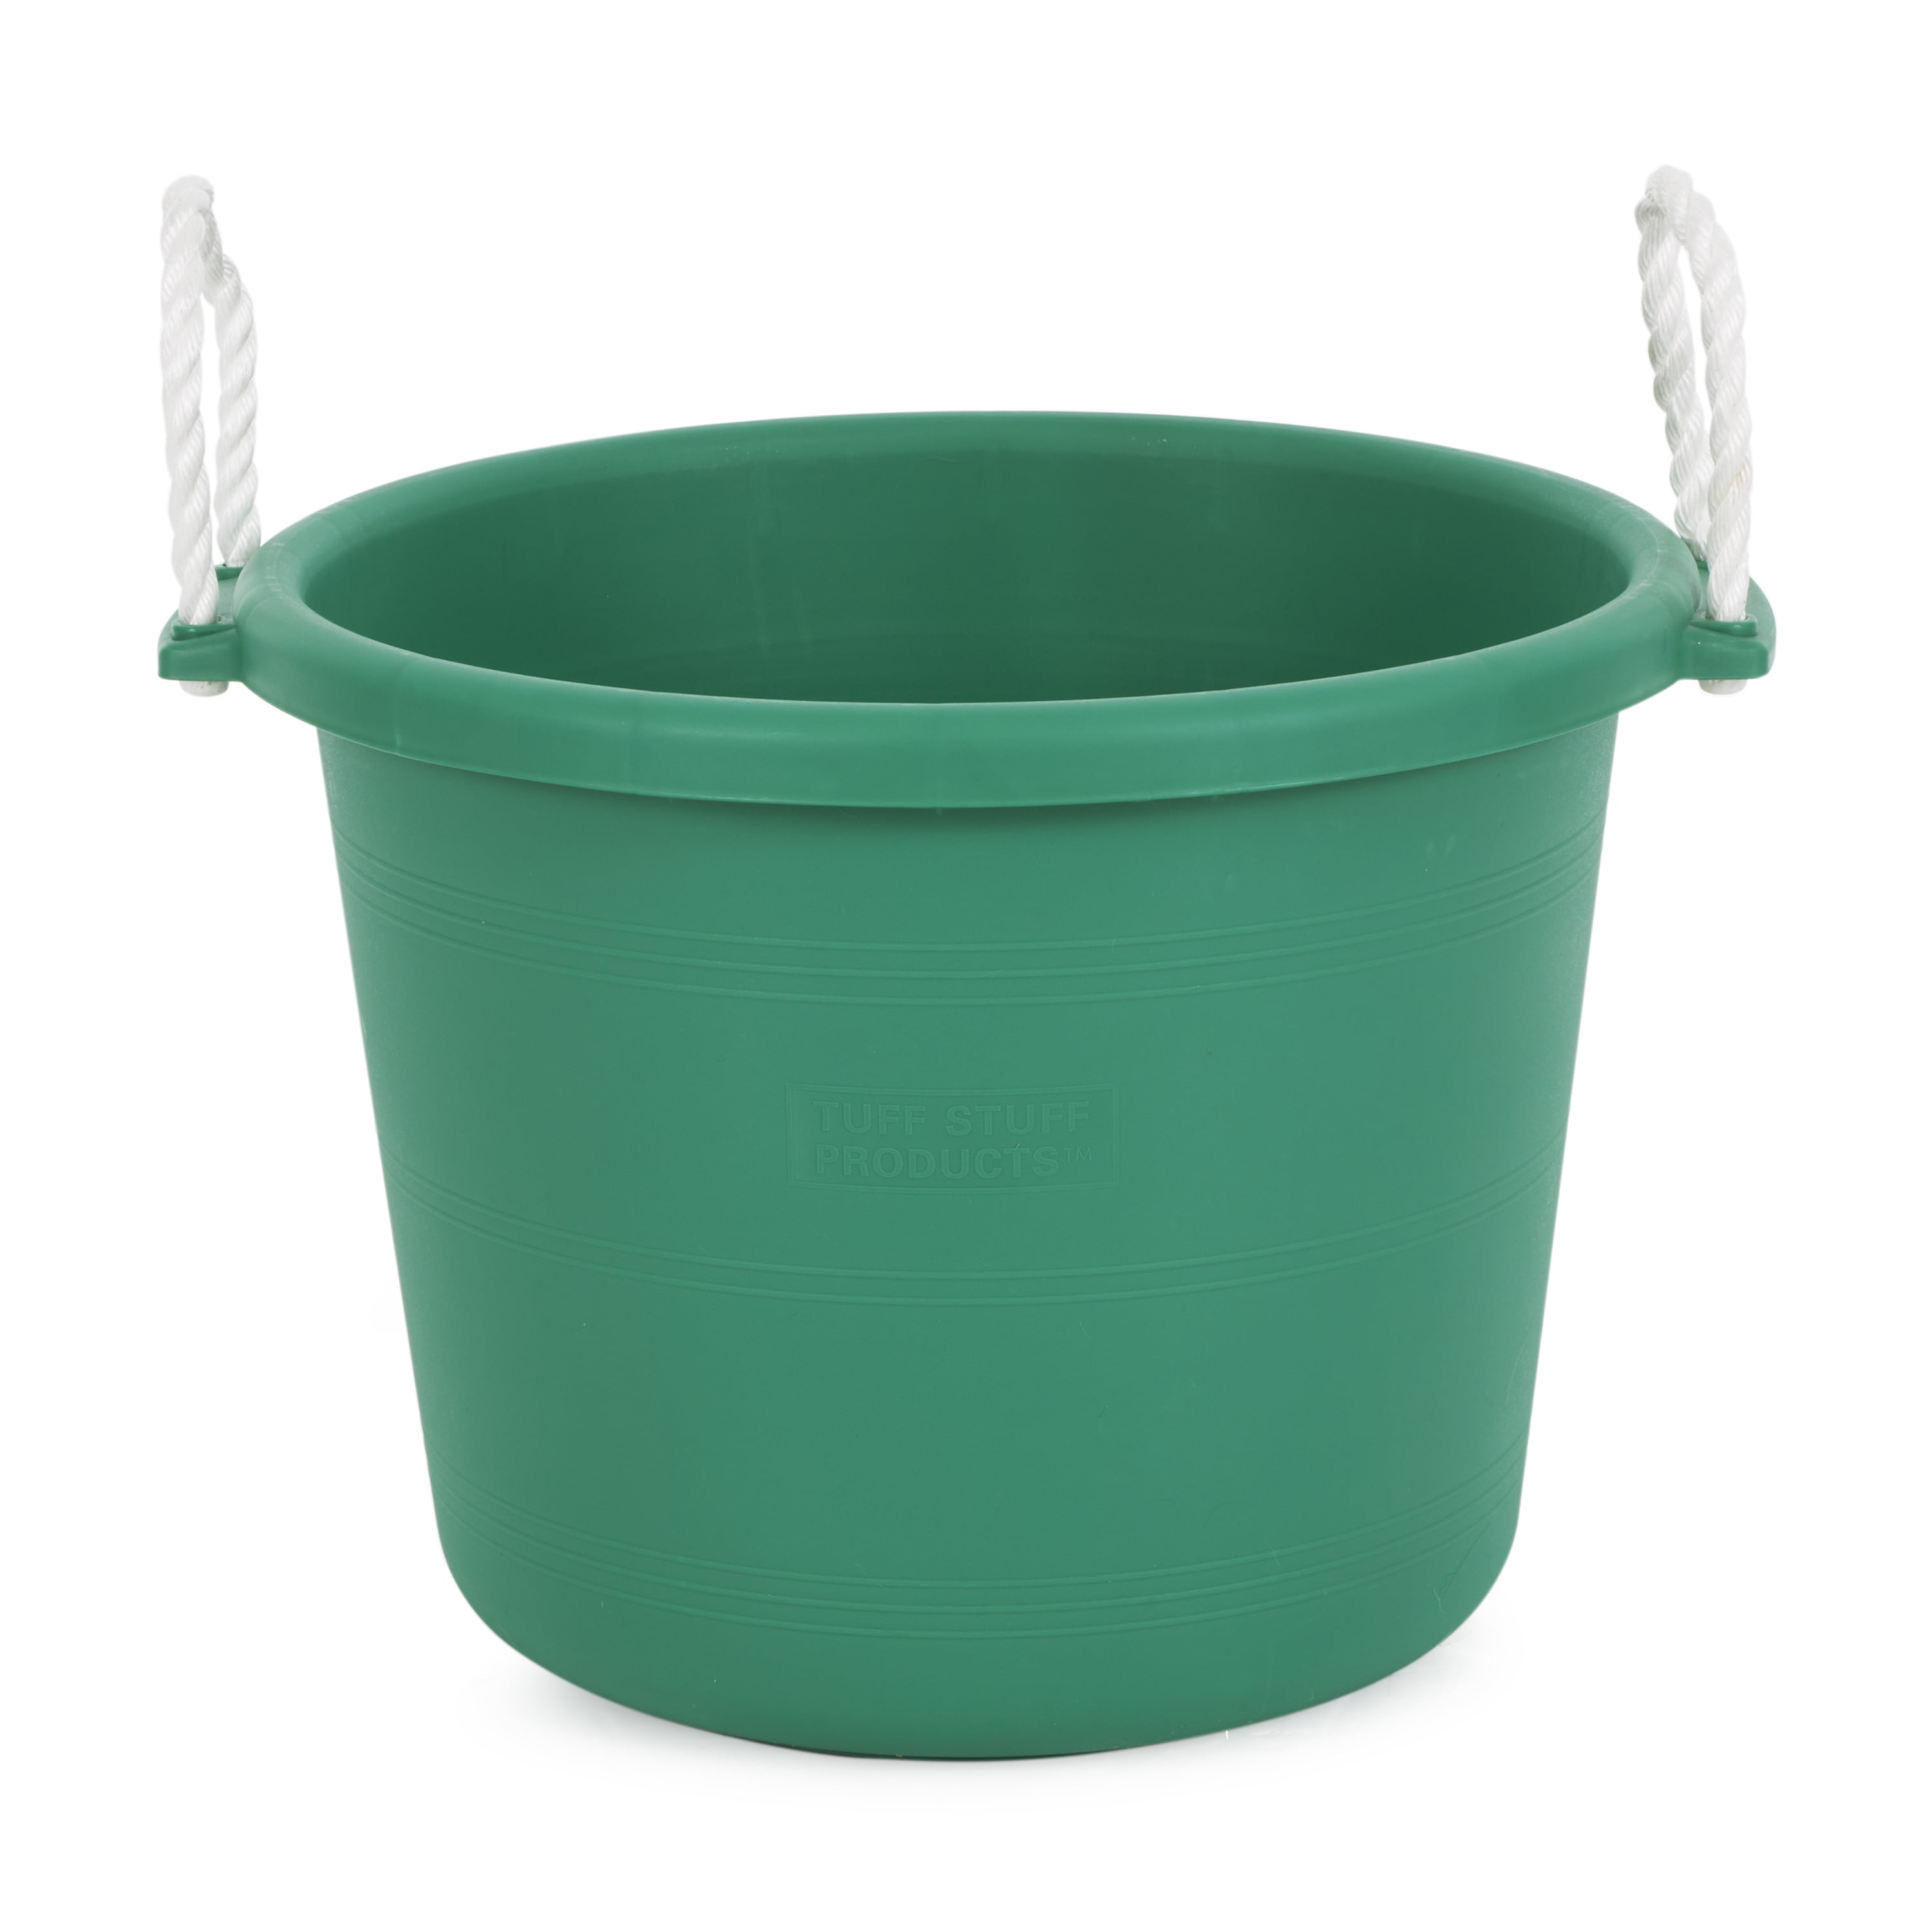 5 Gallon Bucket Saver Clips 10x Pack - Stack Buckets and REMOVE Them With  Ease!-Green - Kitchen Tools & Utensils, Facebook Marketplace